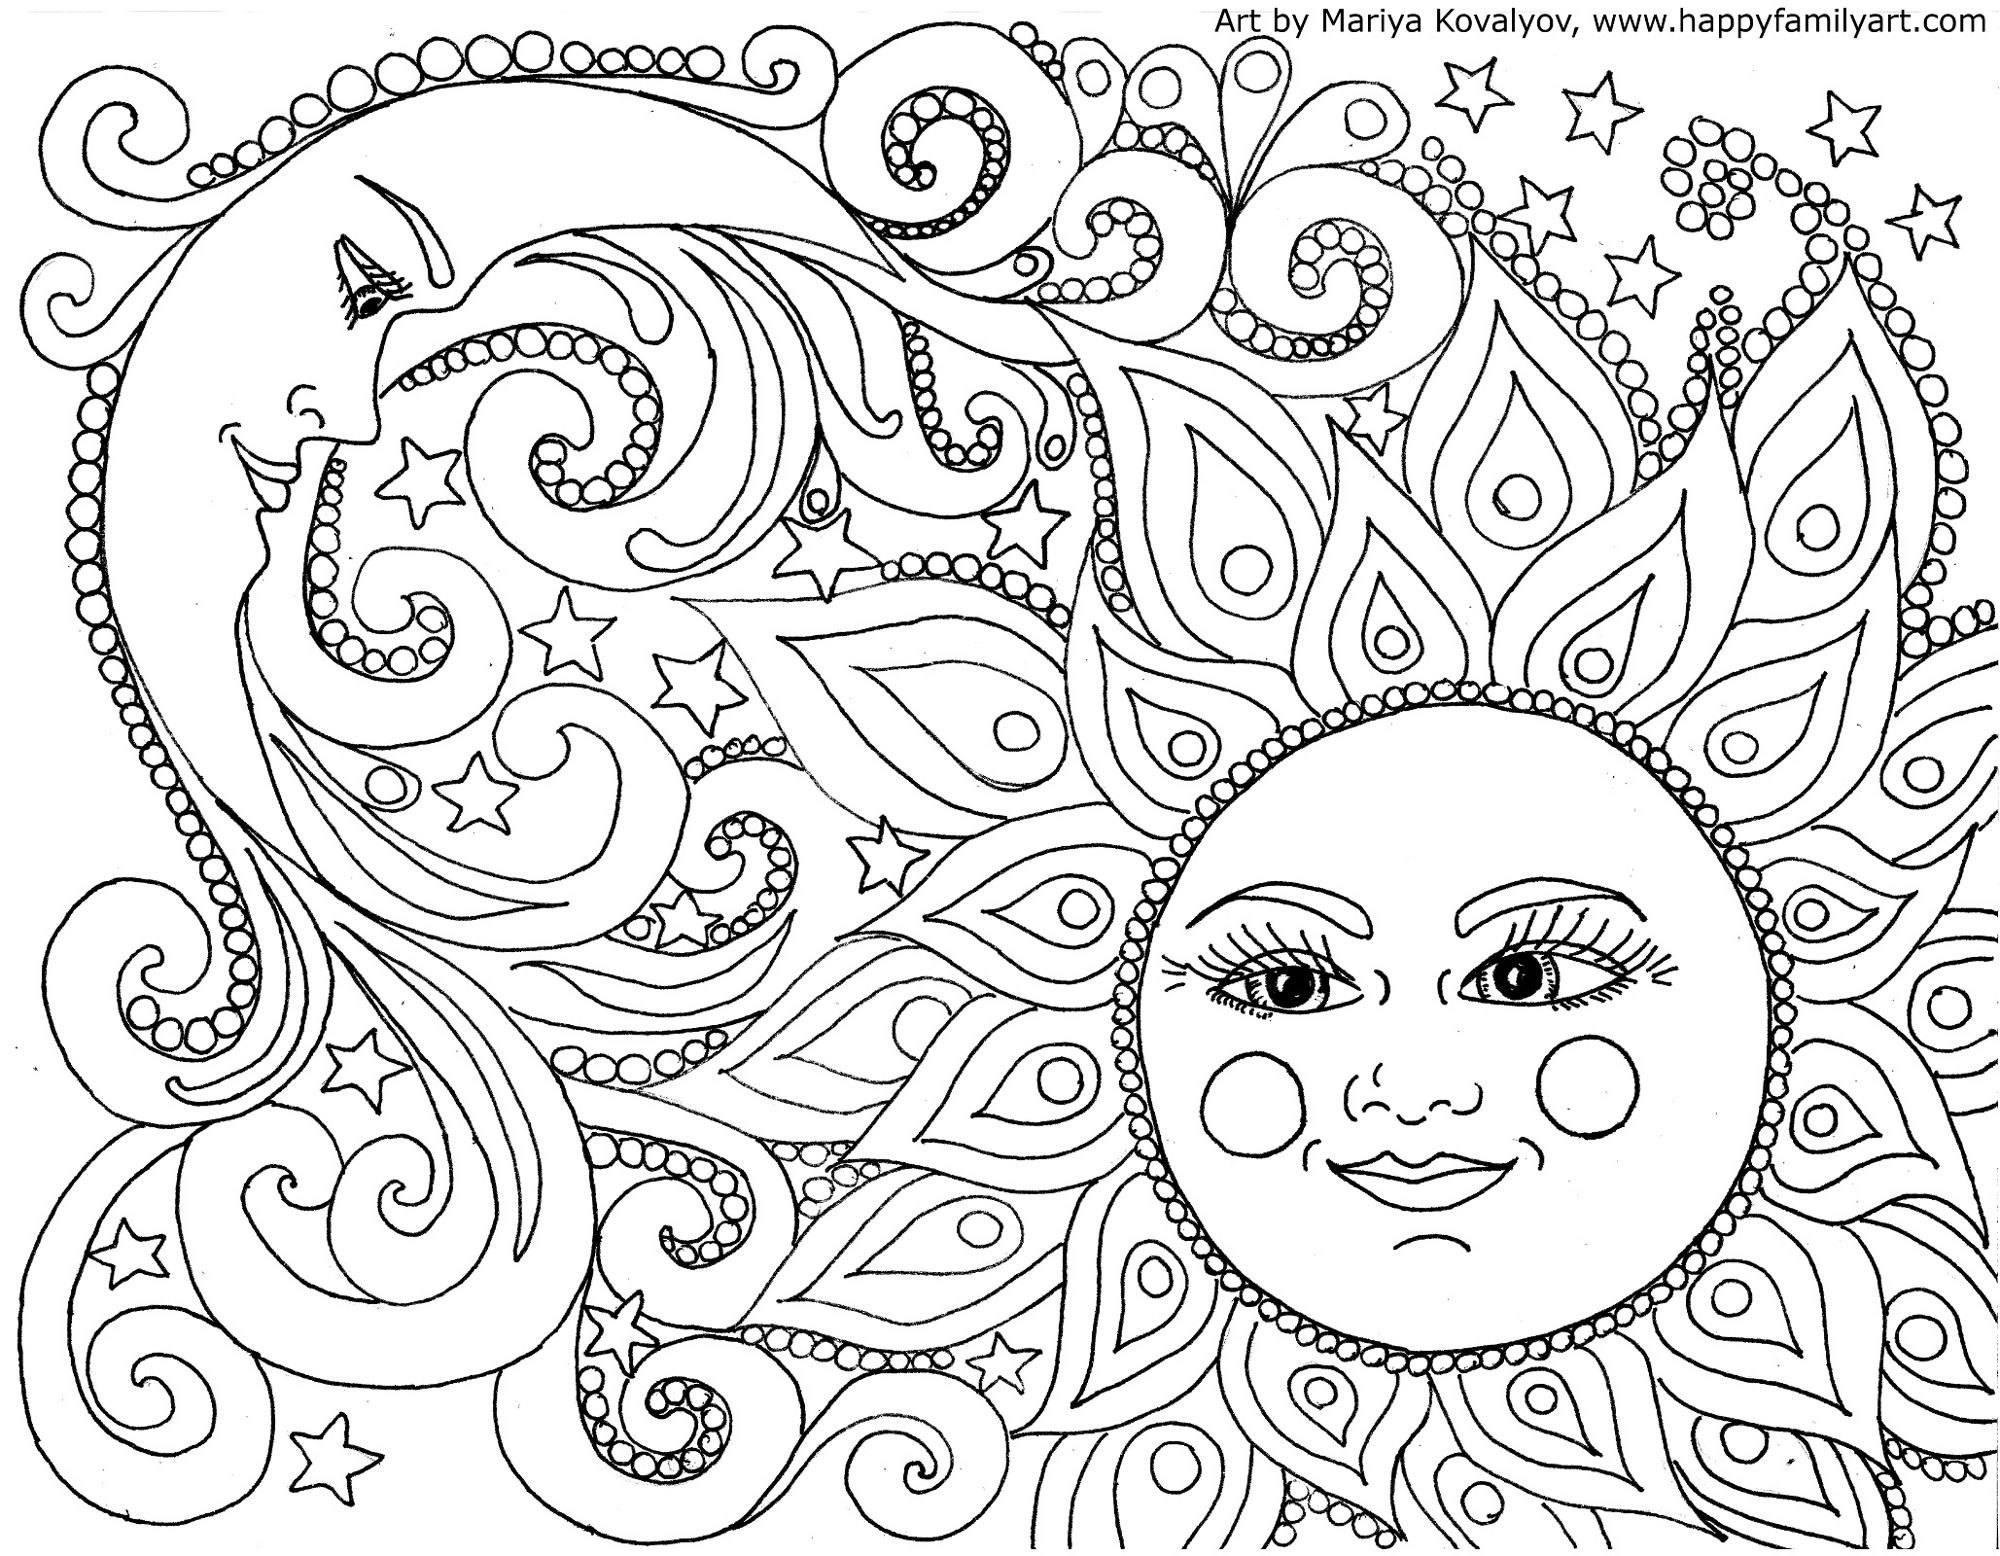 free-free-printable-geometric-design-coloring-pages-download-free-free